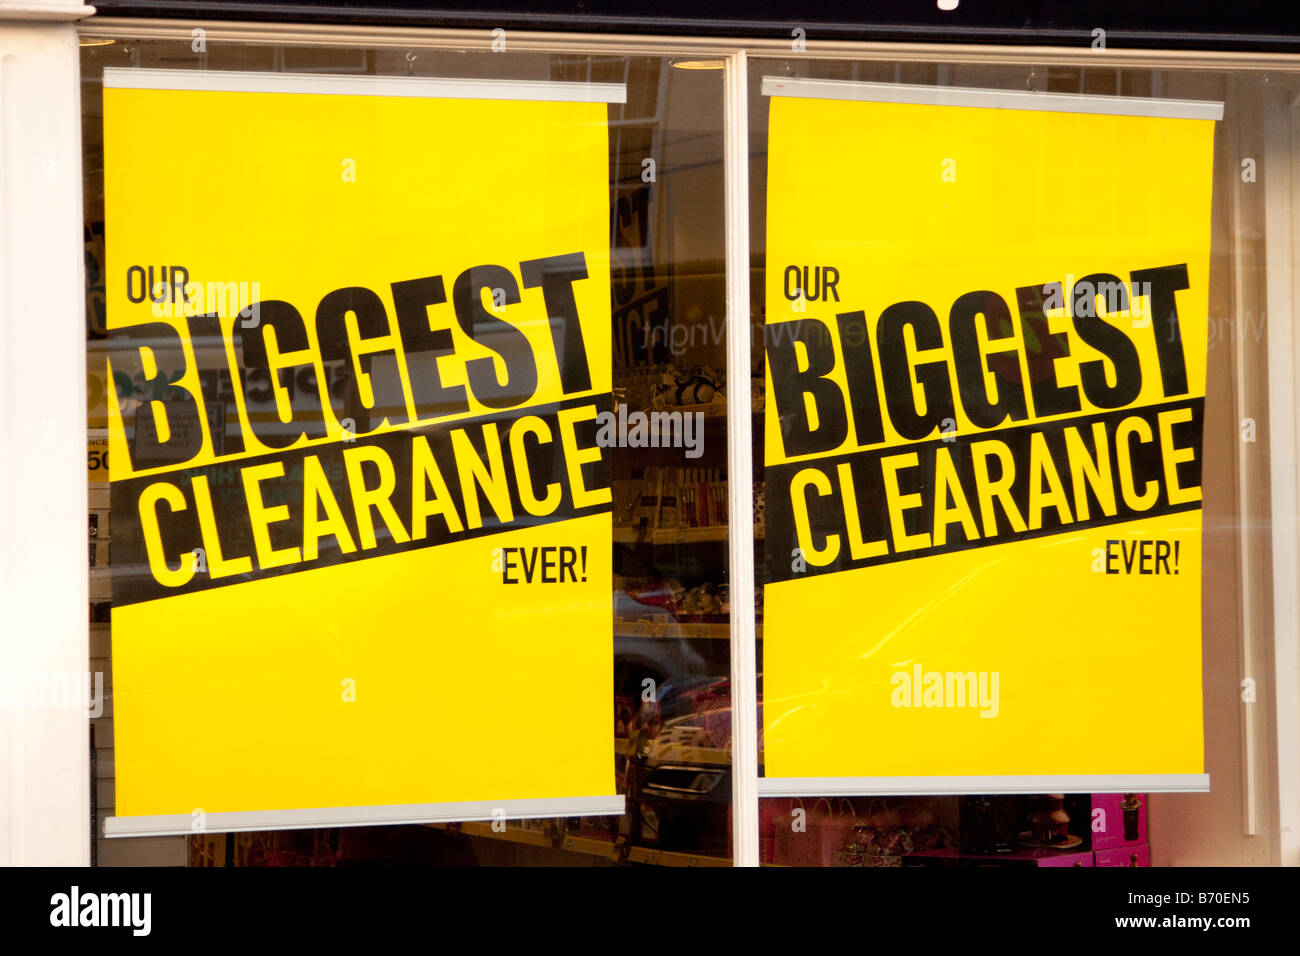 https://c8.alamy.com/comp/B70EN5/2-yellow-sale-signs-in-a-shop-window-claiming-the-biggest-clearance-B70EN5.jpg